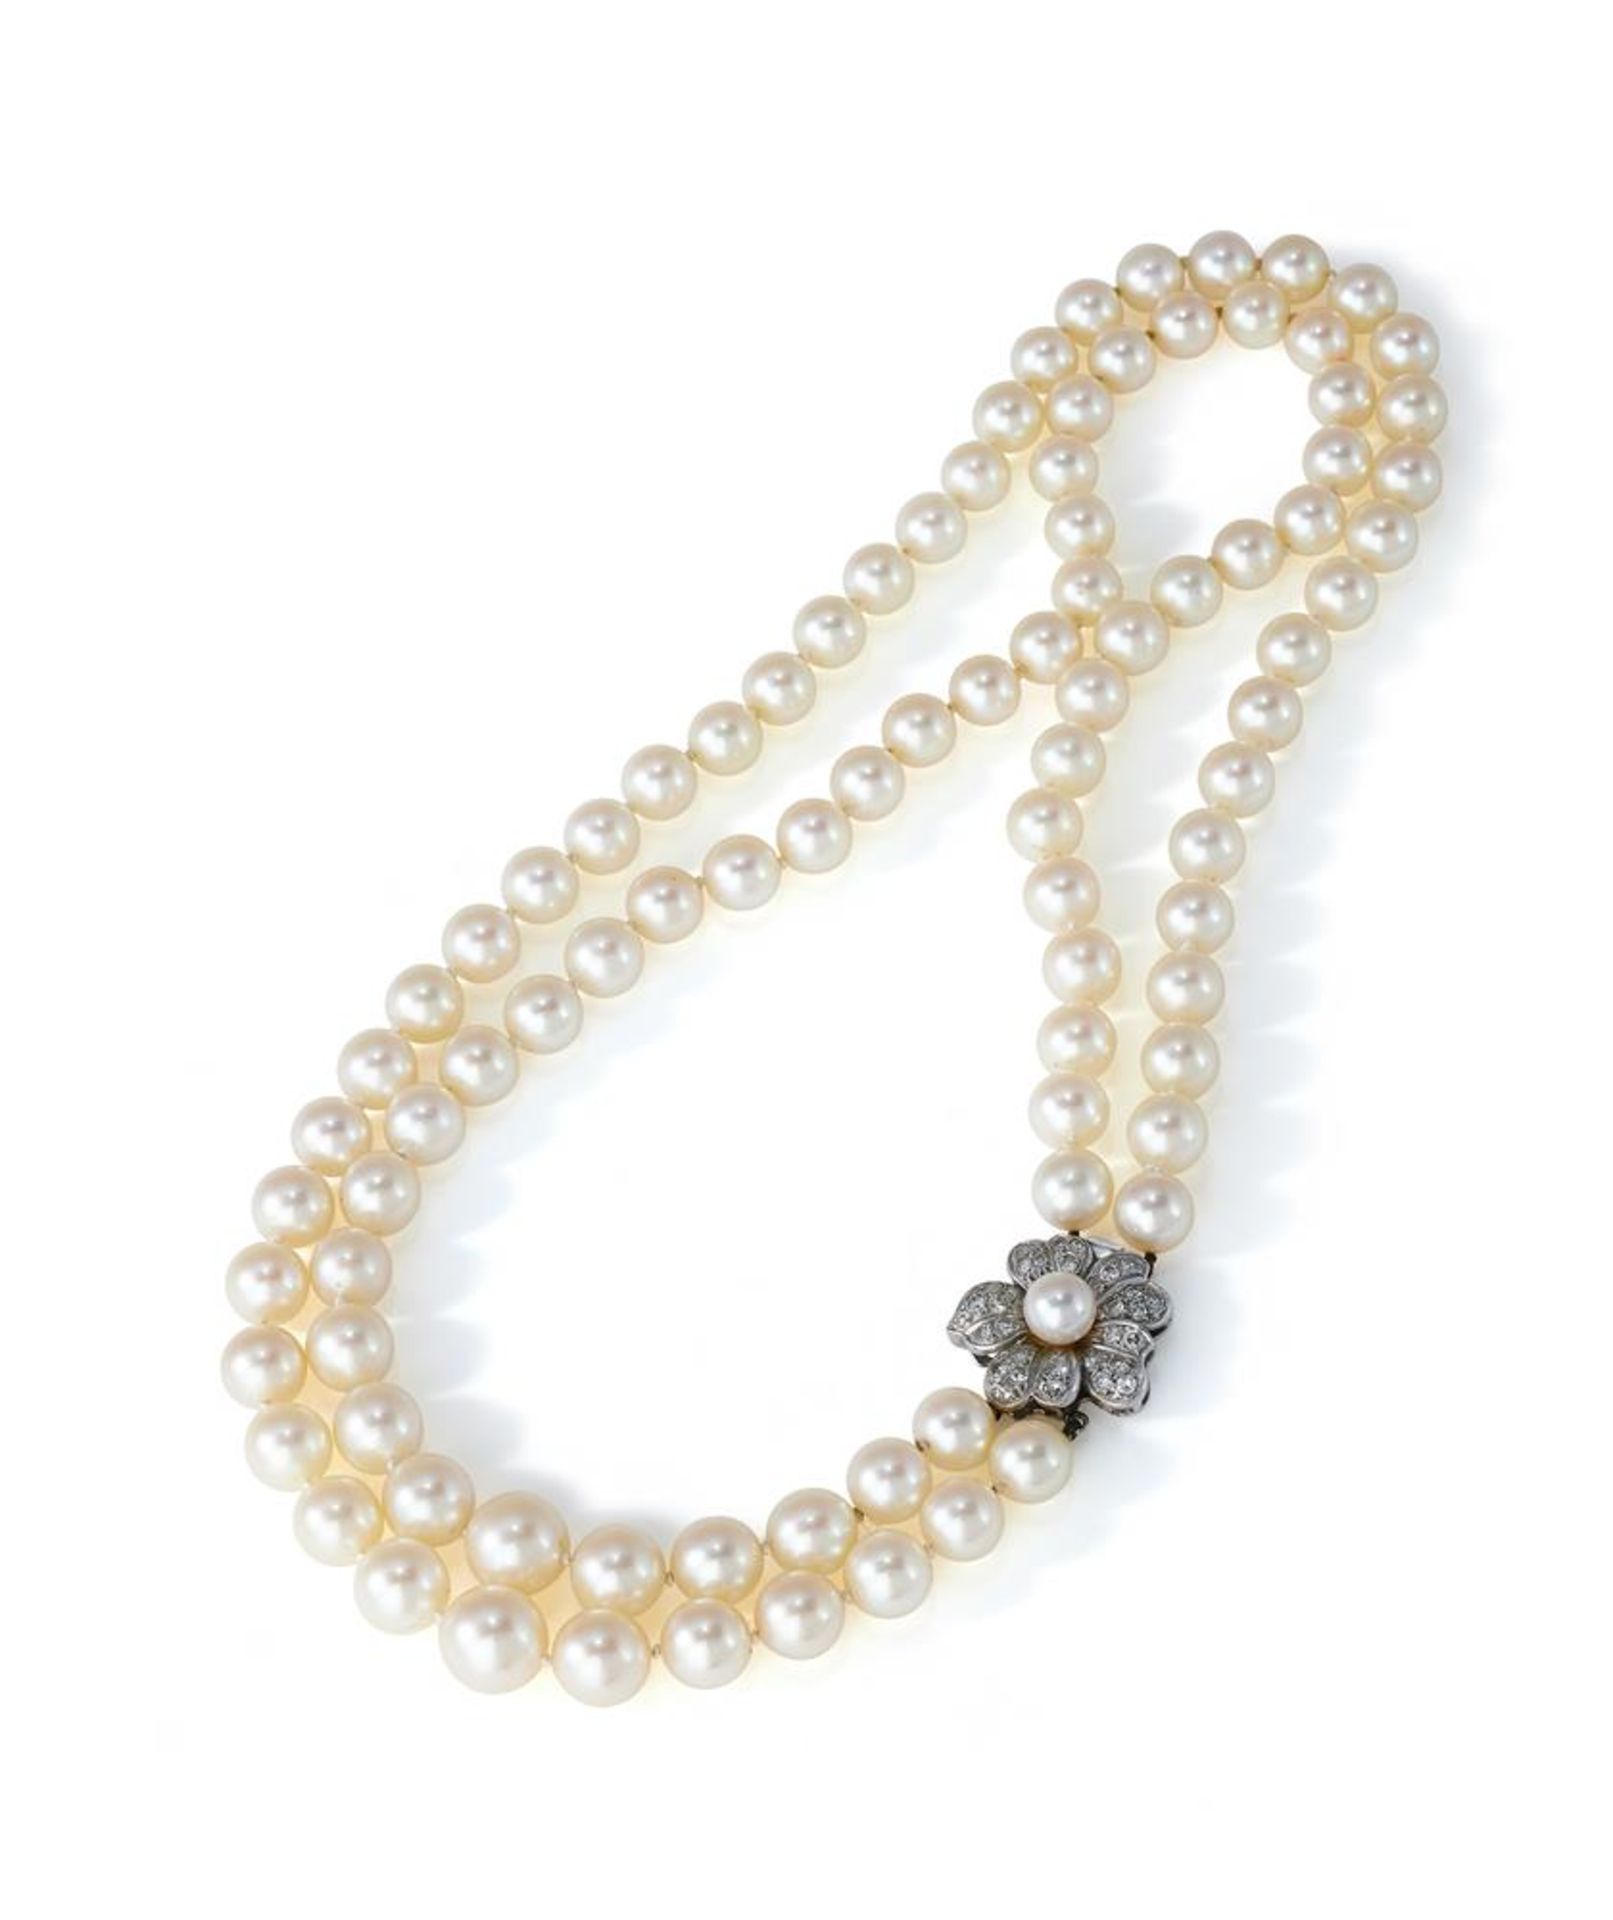 A TWO ROW CULTURED PEARL NECKLACE - Image 2 of 2